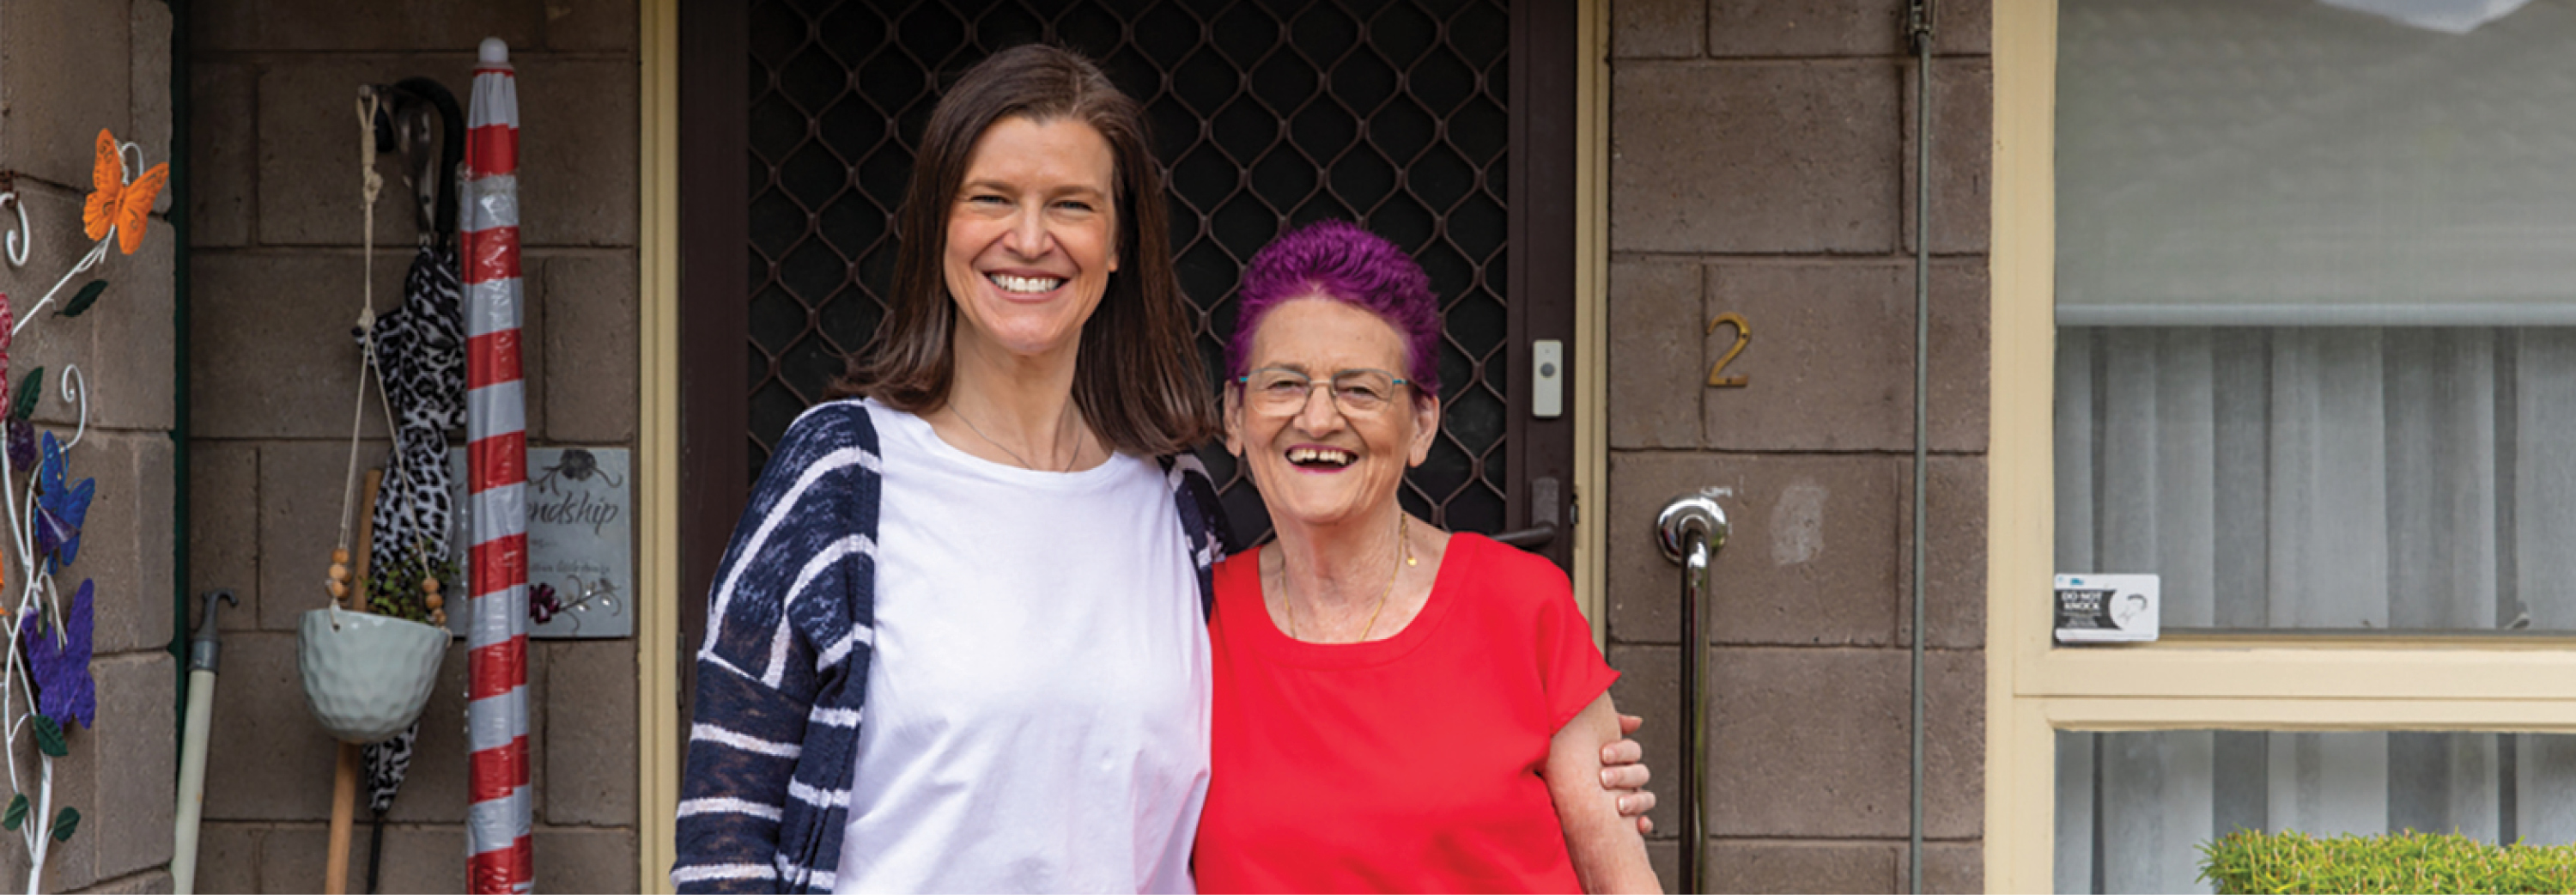 2 women smiling outside their front door